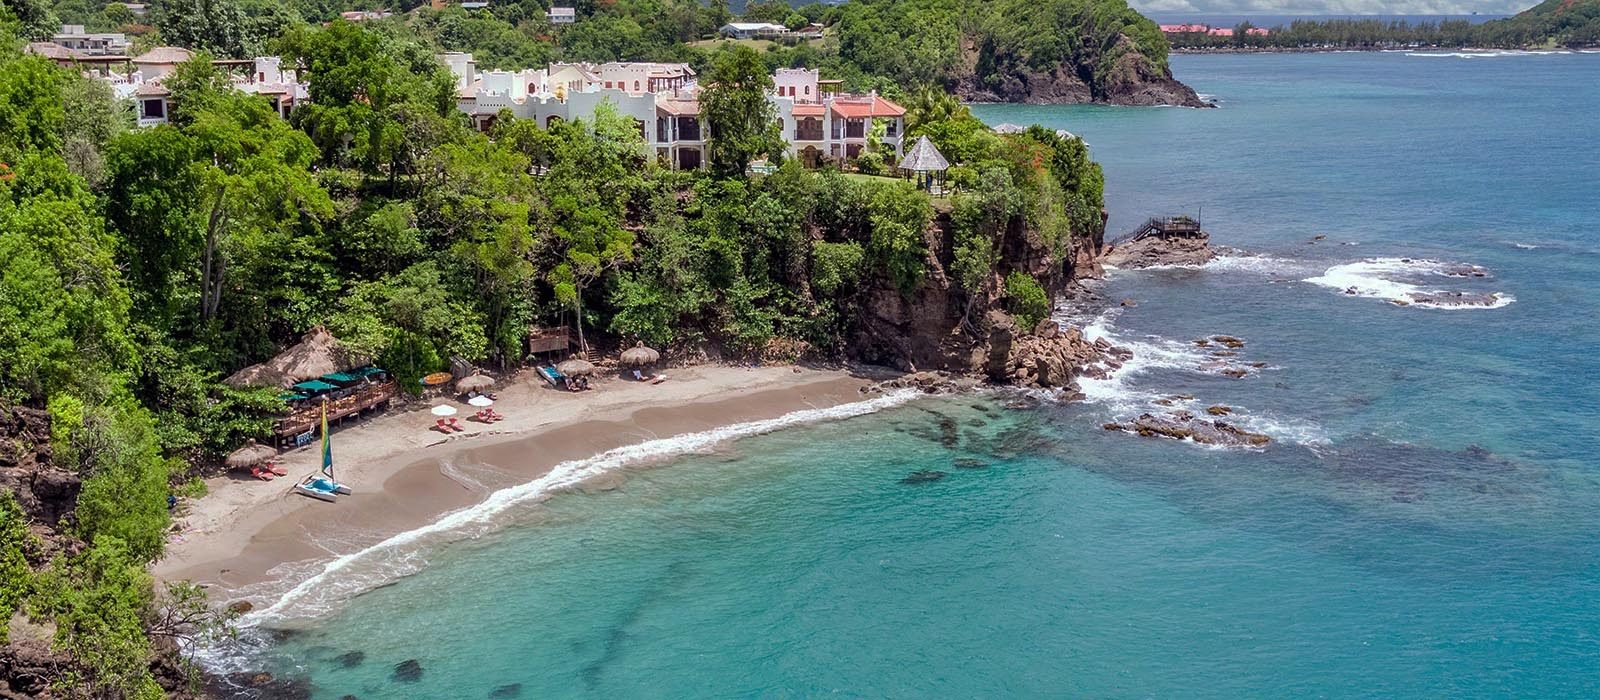 Luxury St Lucia Holiday Packages Cap Maison, St Lucia Header